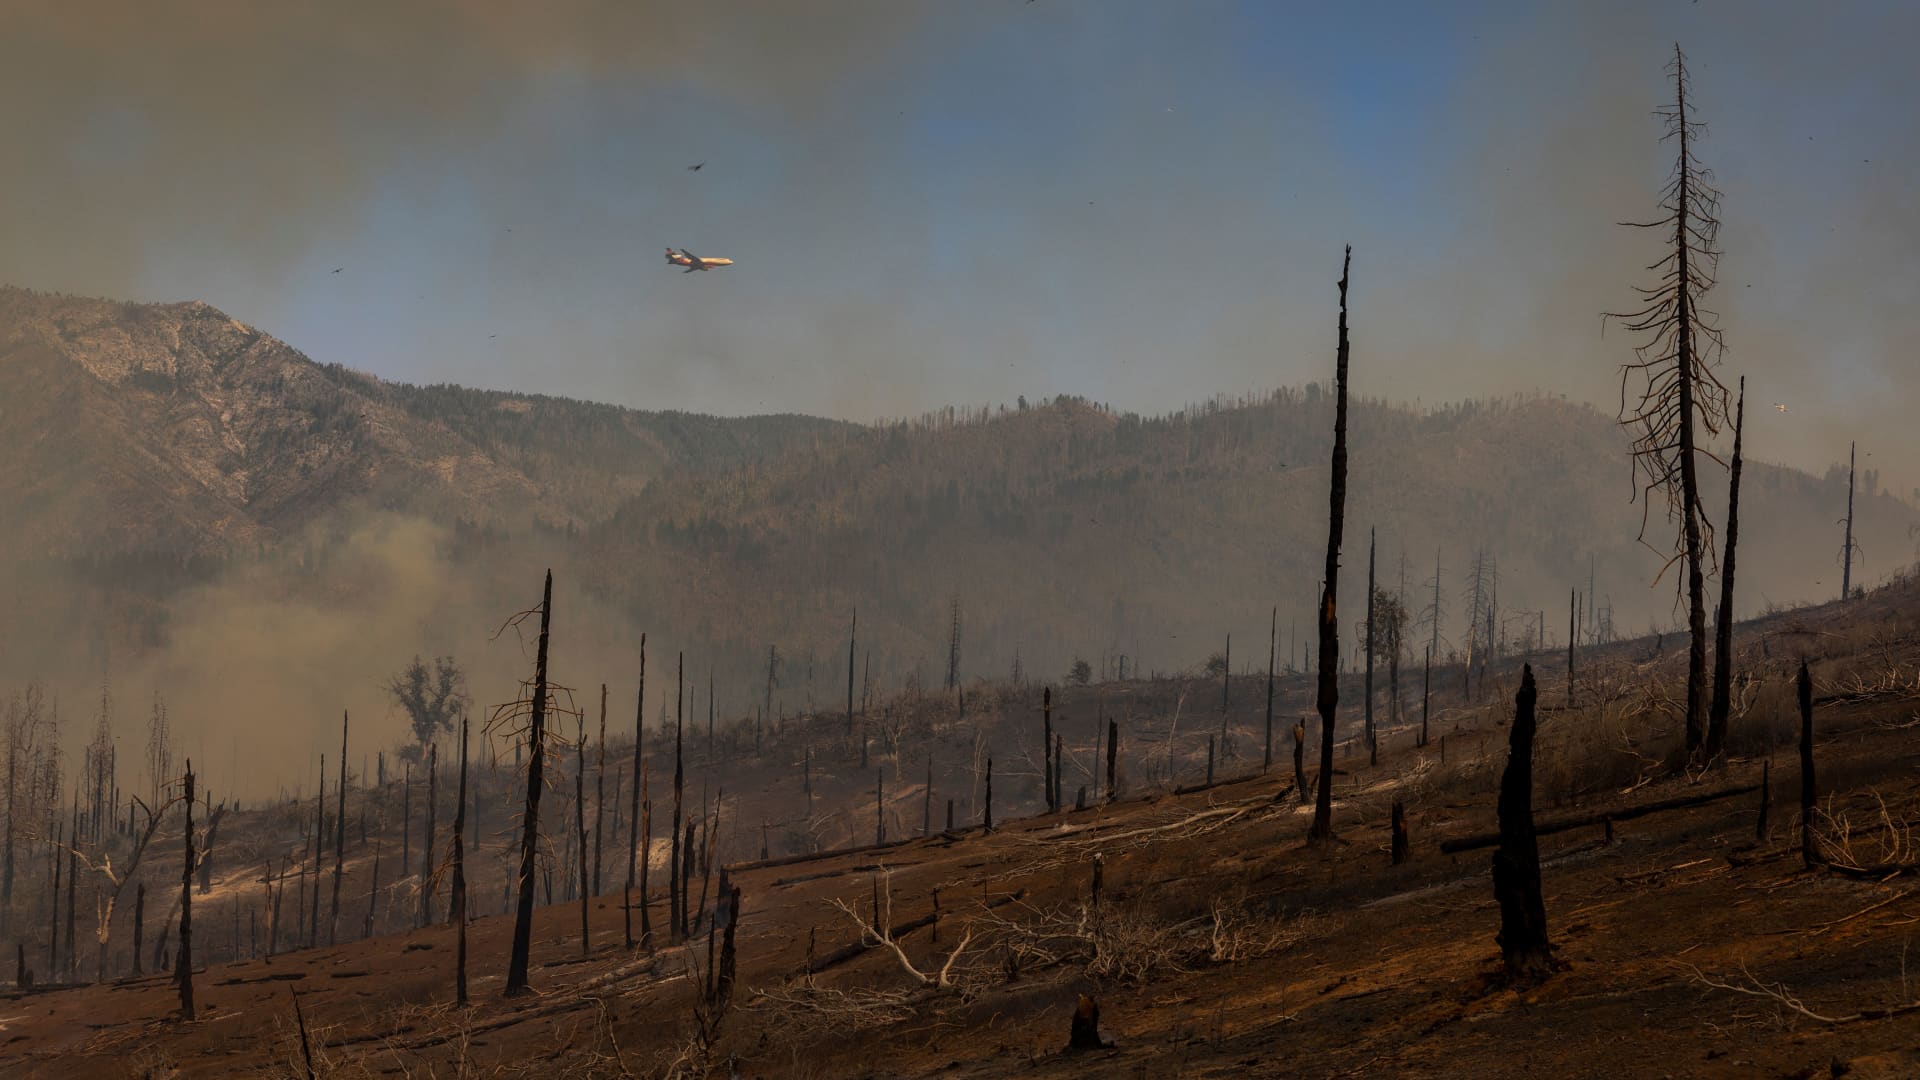 A firefighting air tanker flies over a forest decimated by the Oak Fire near Mariposa, California, on July 24, 2022.